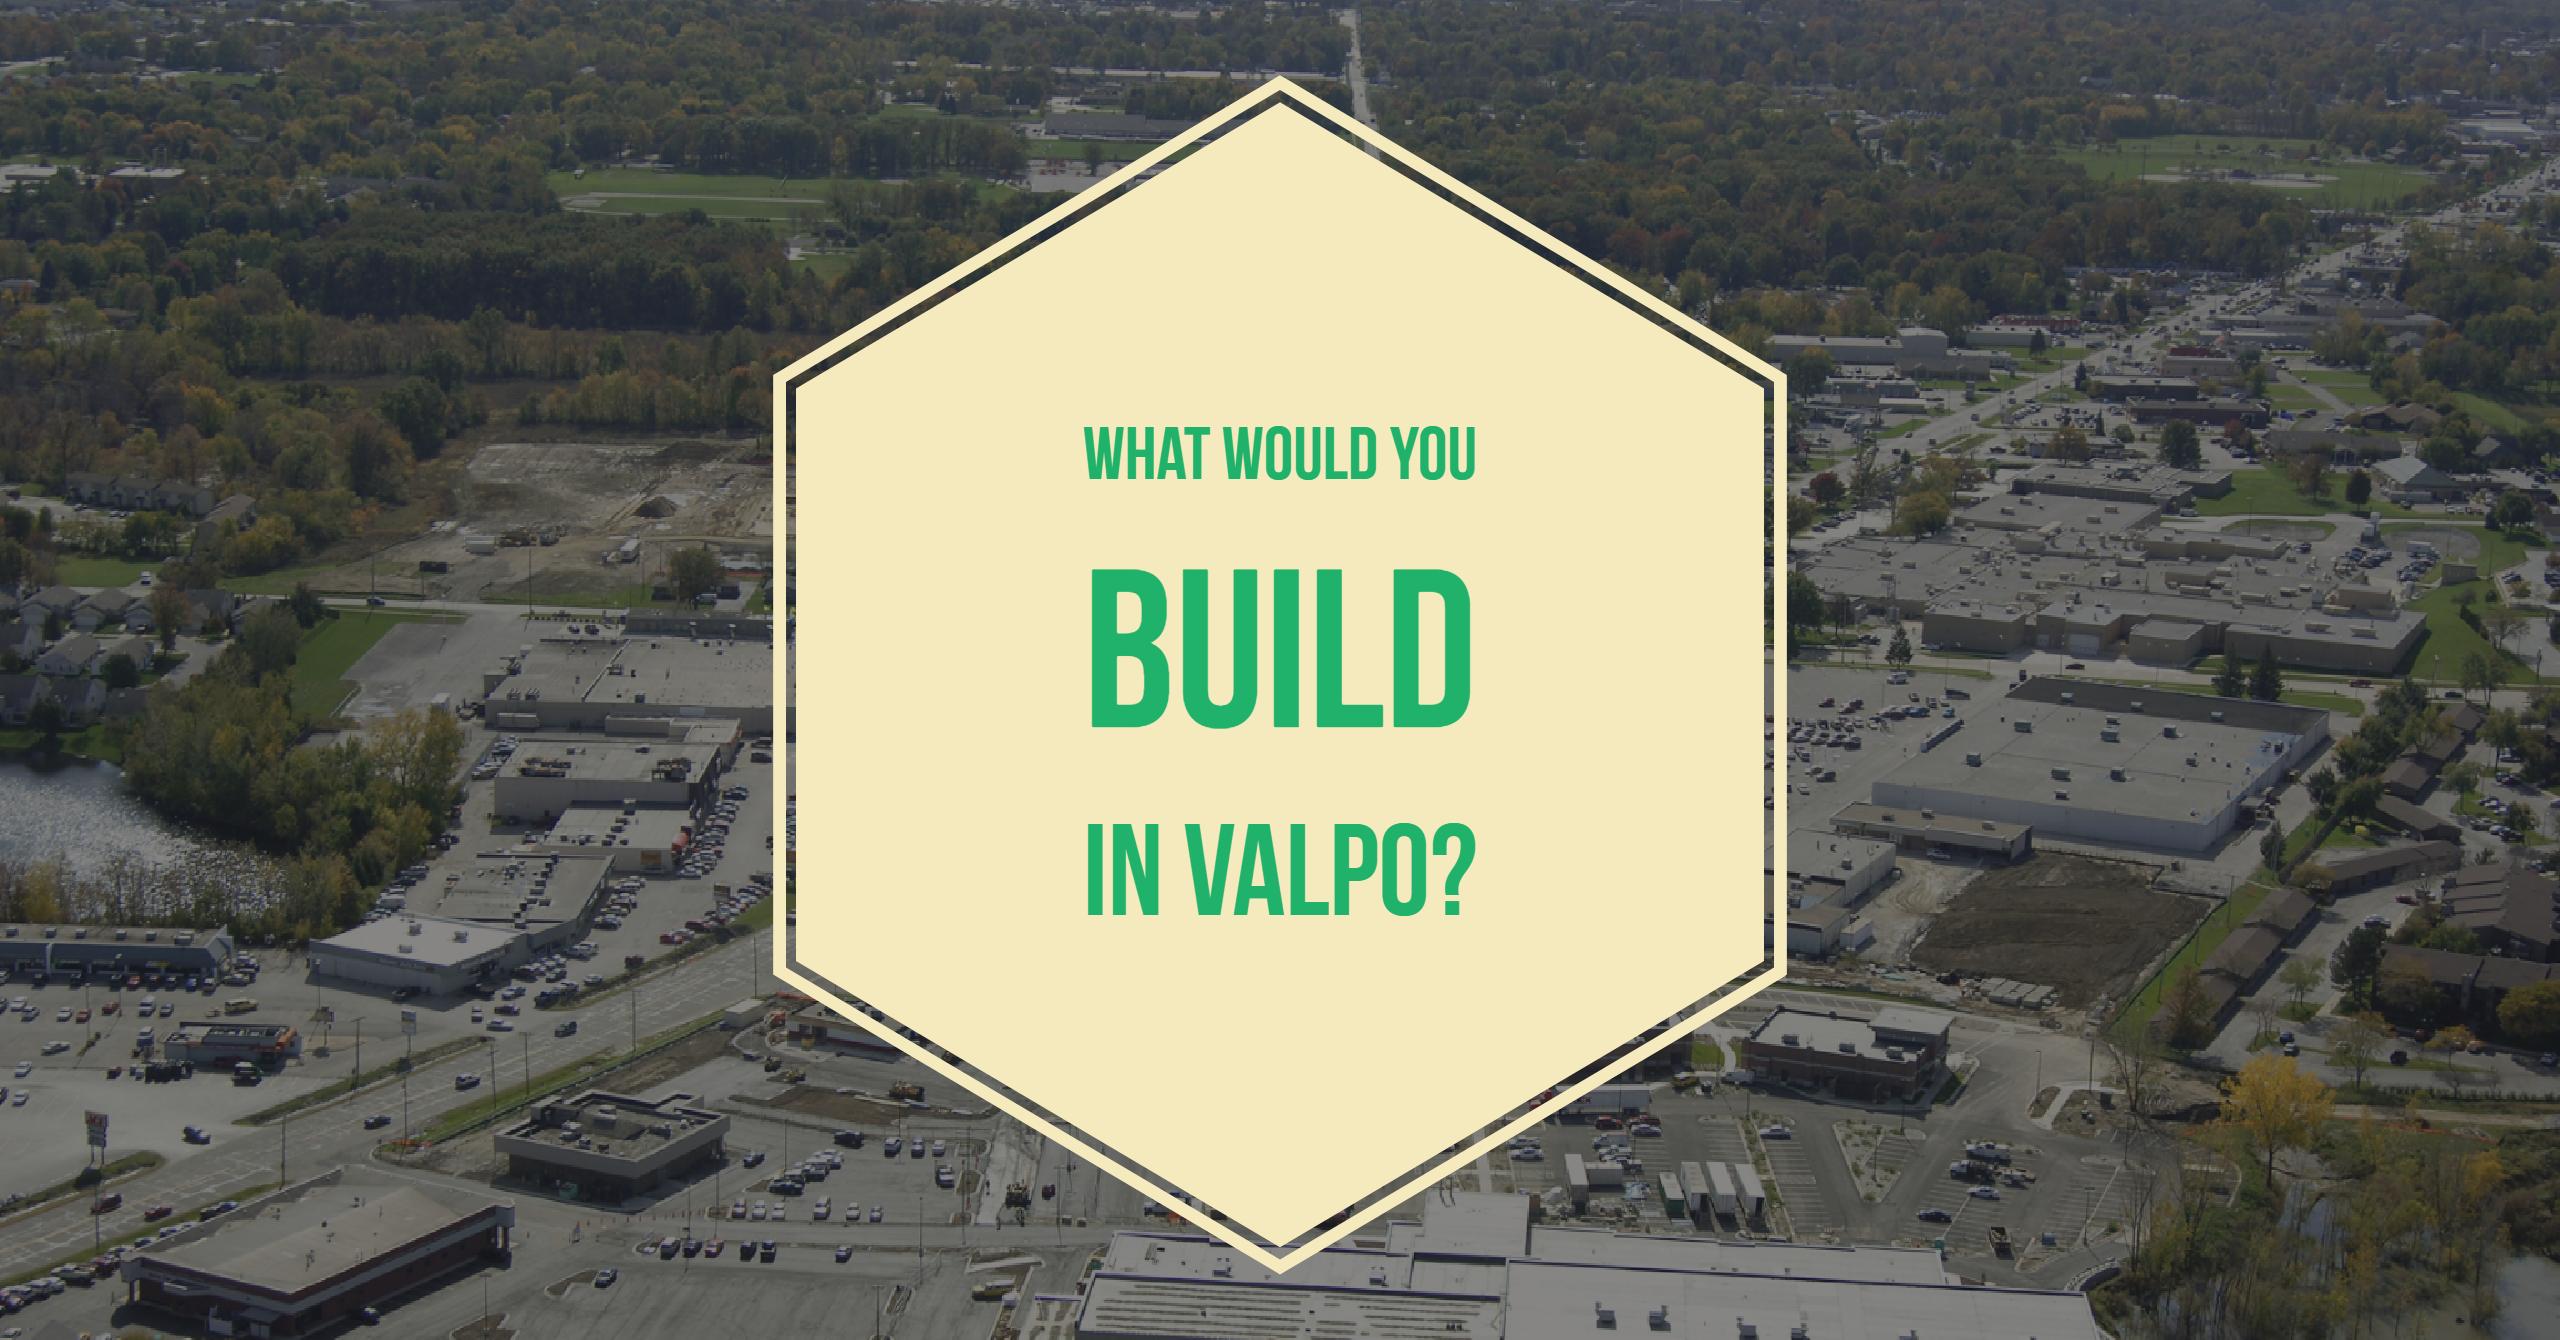 If Valpo Residents Could Build One Thing, What Would it Be?